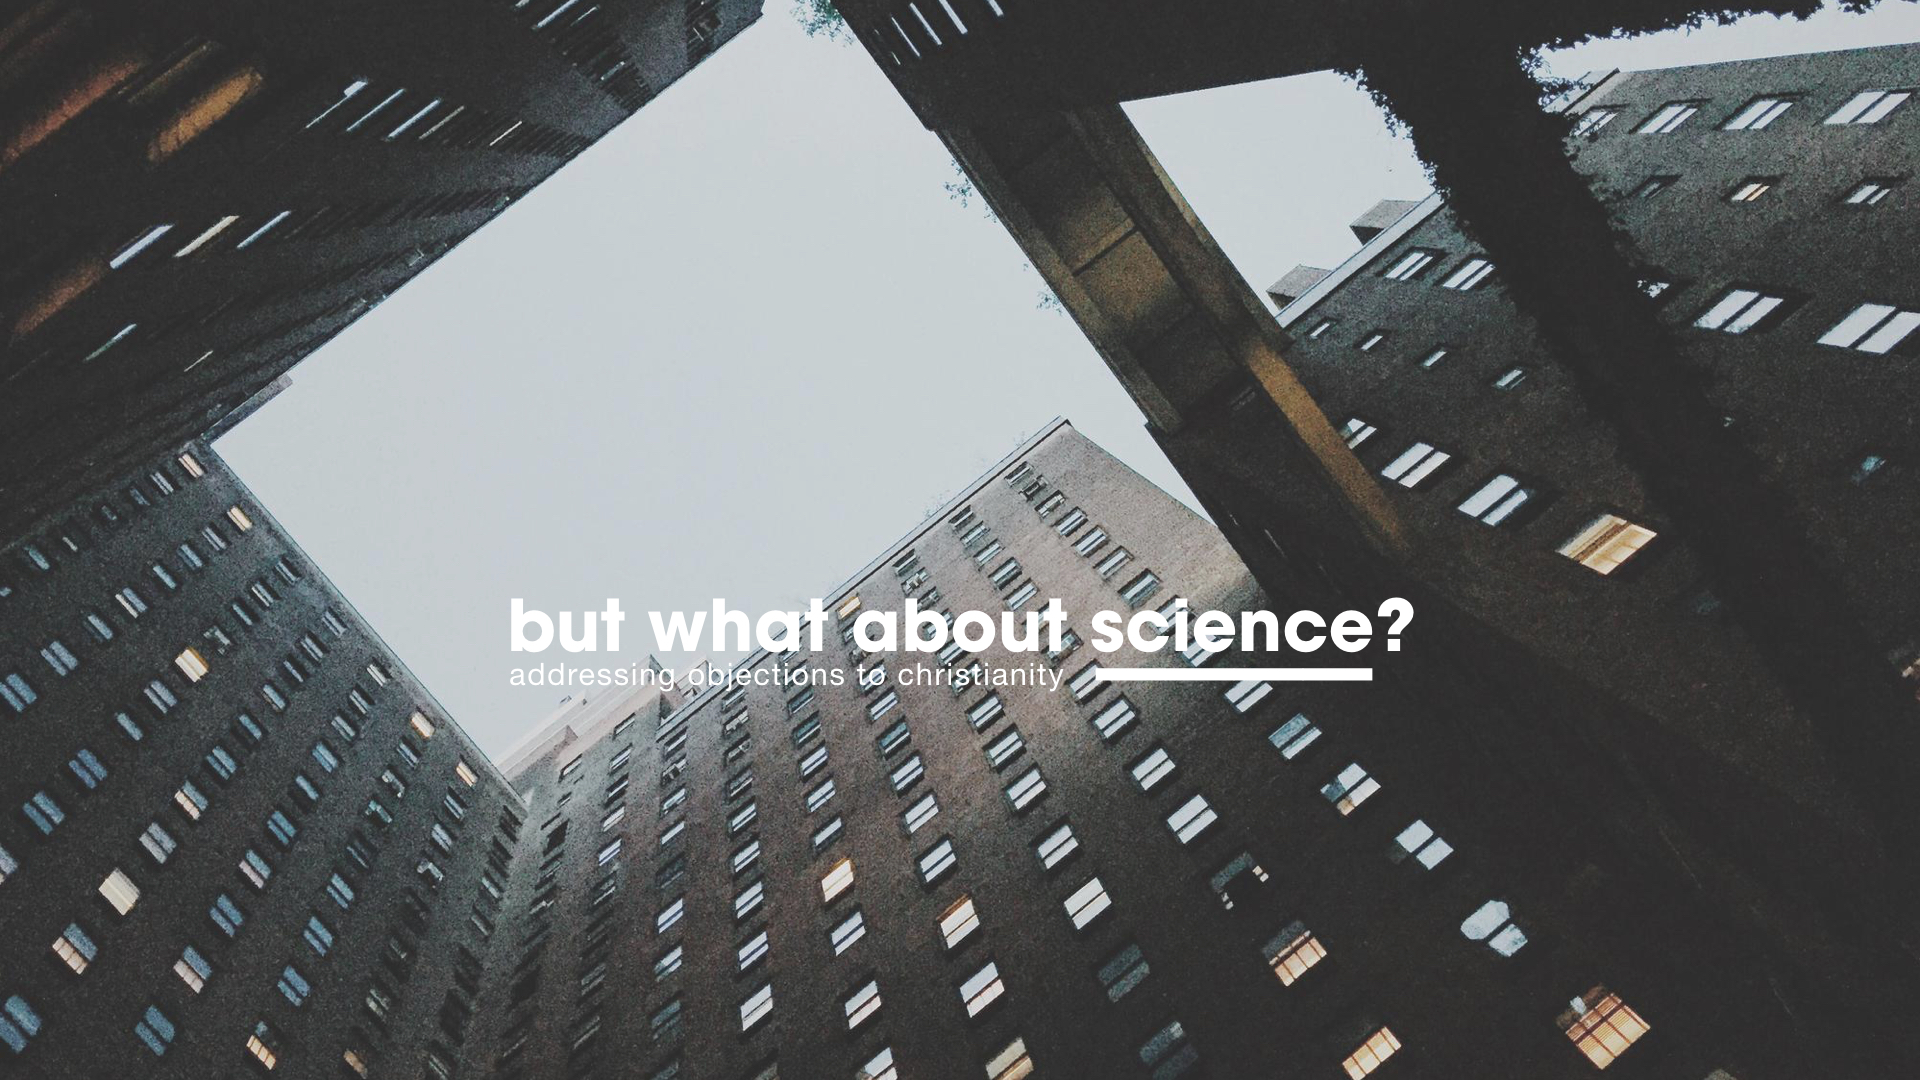 Science?